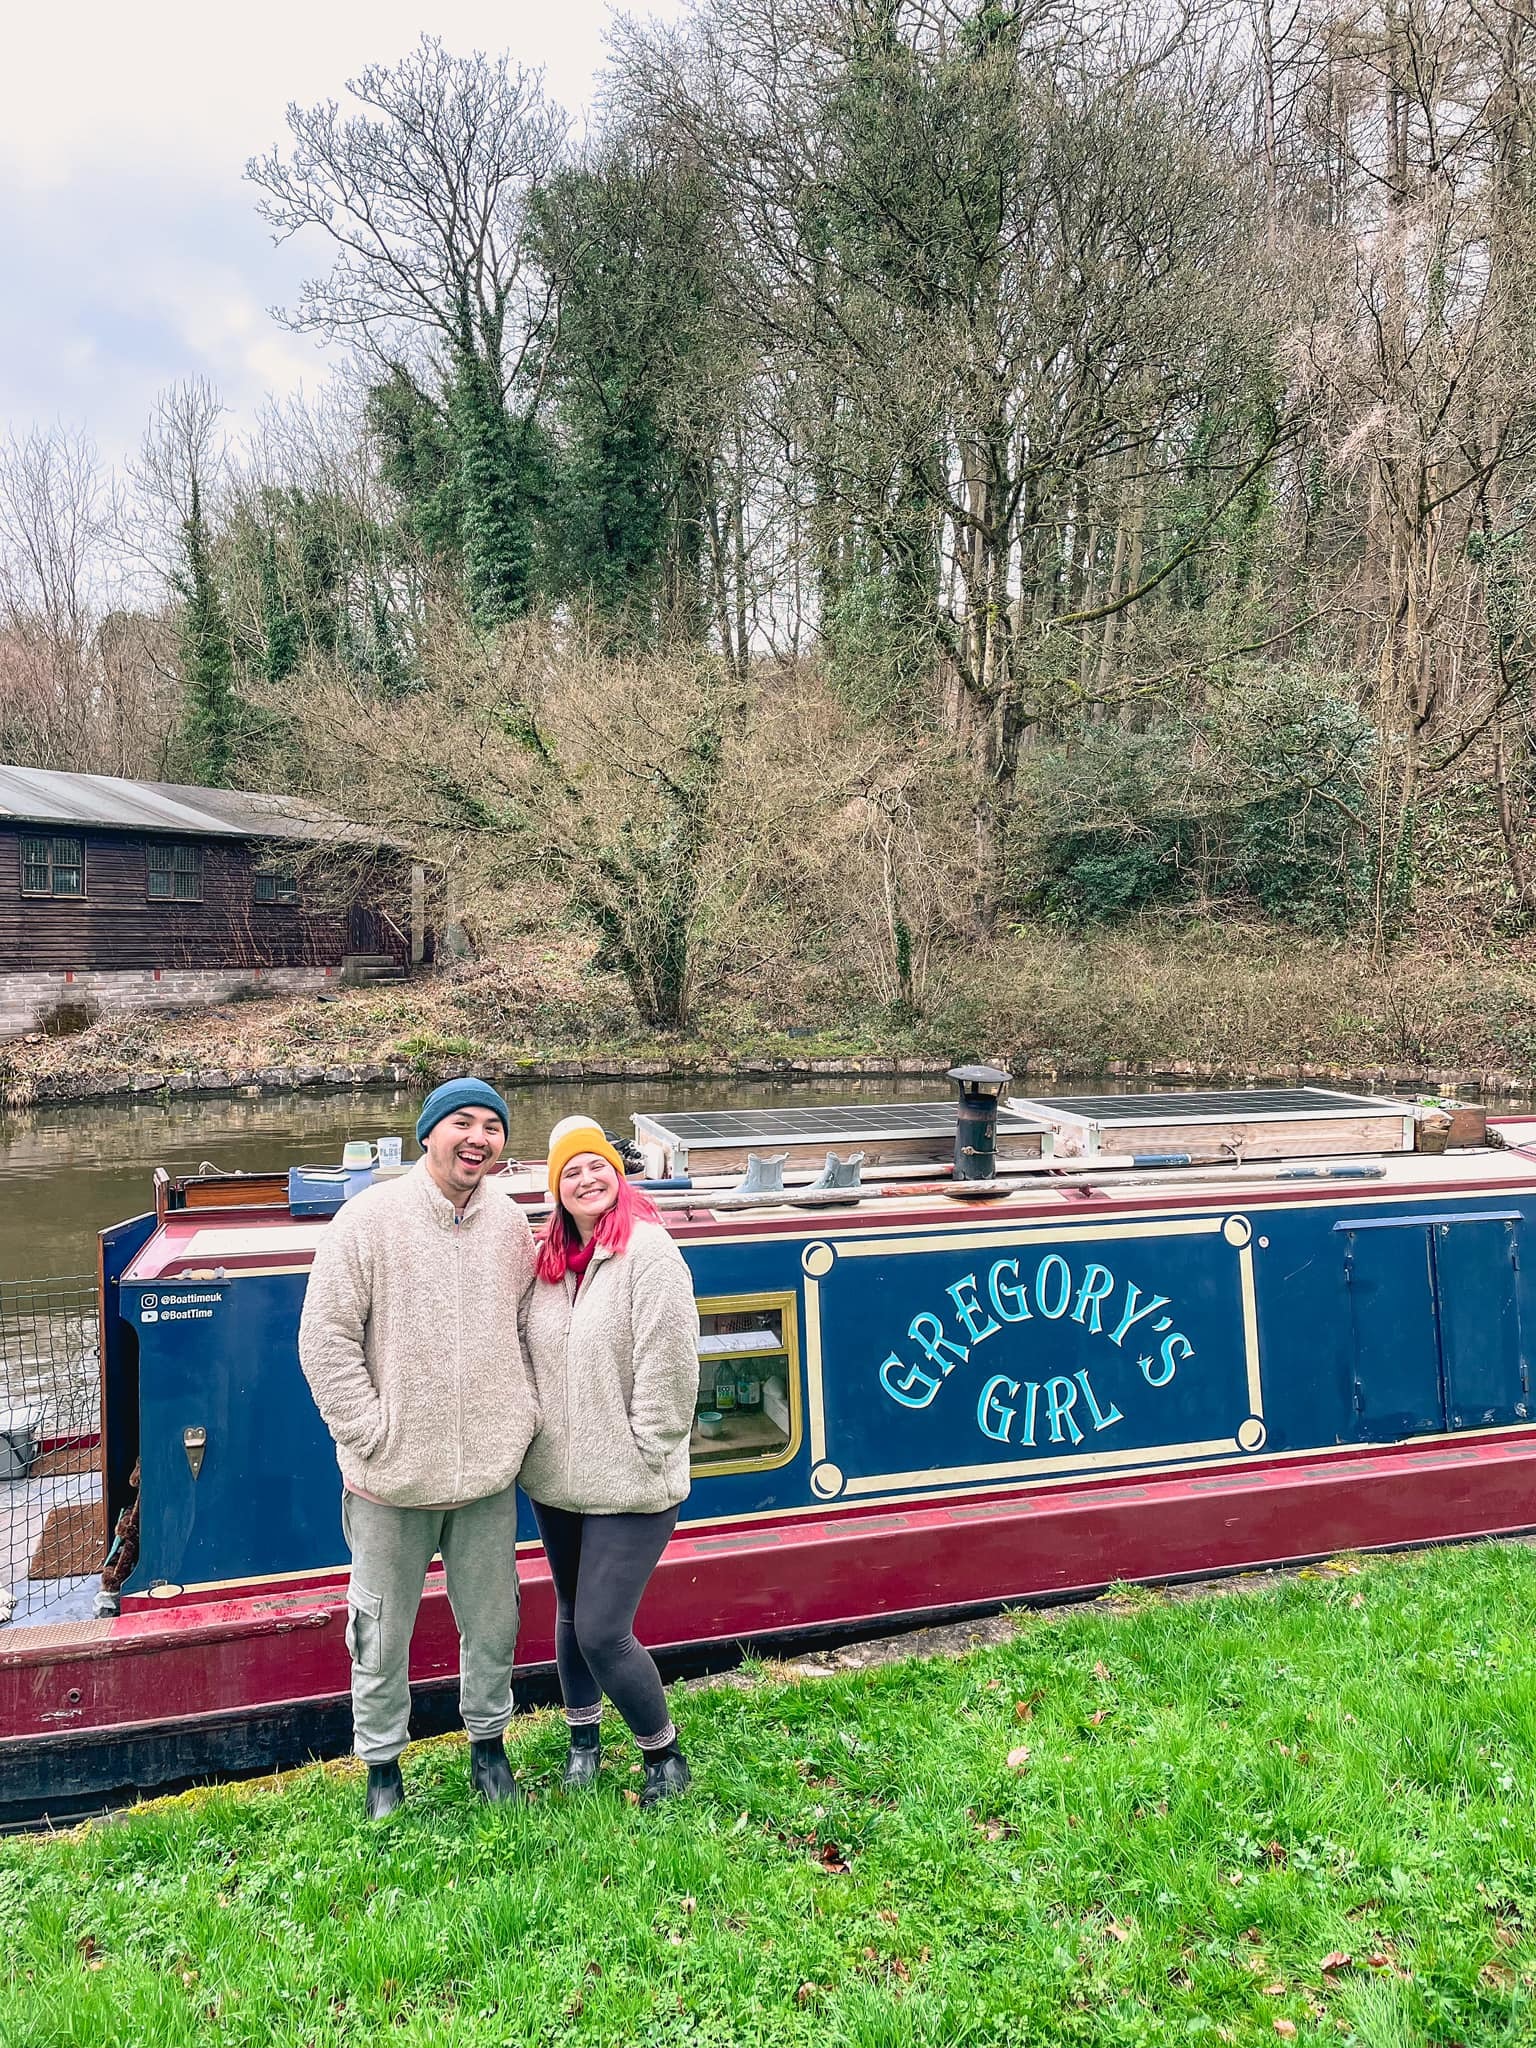 Wes and Amy by their boat. Image: SWNS